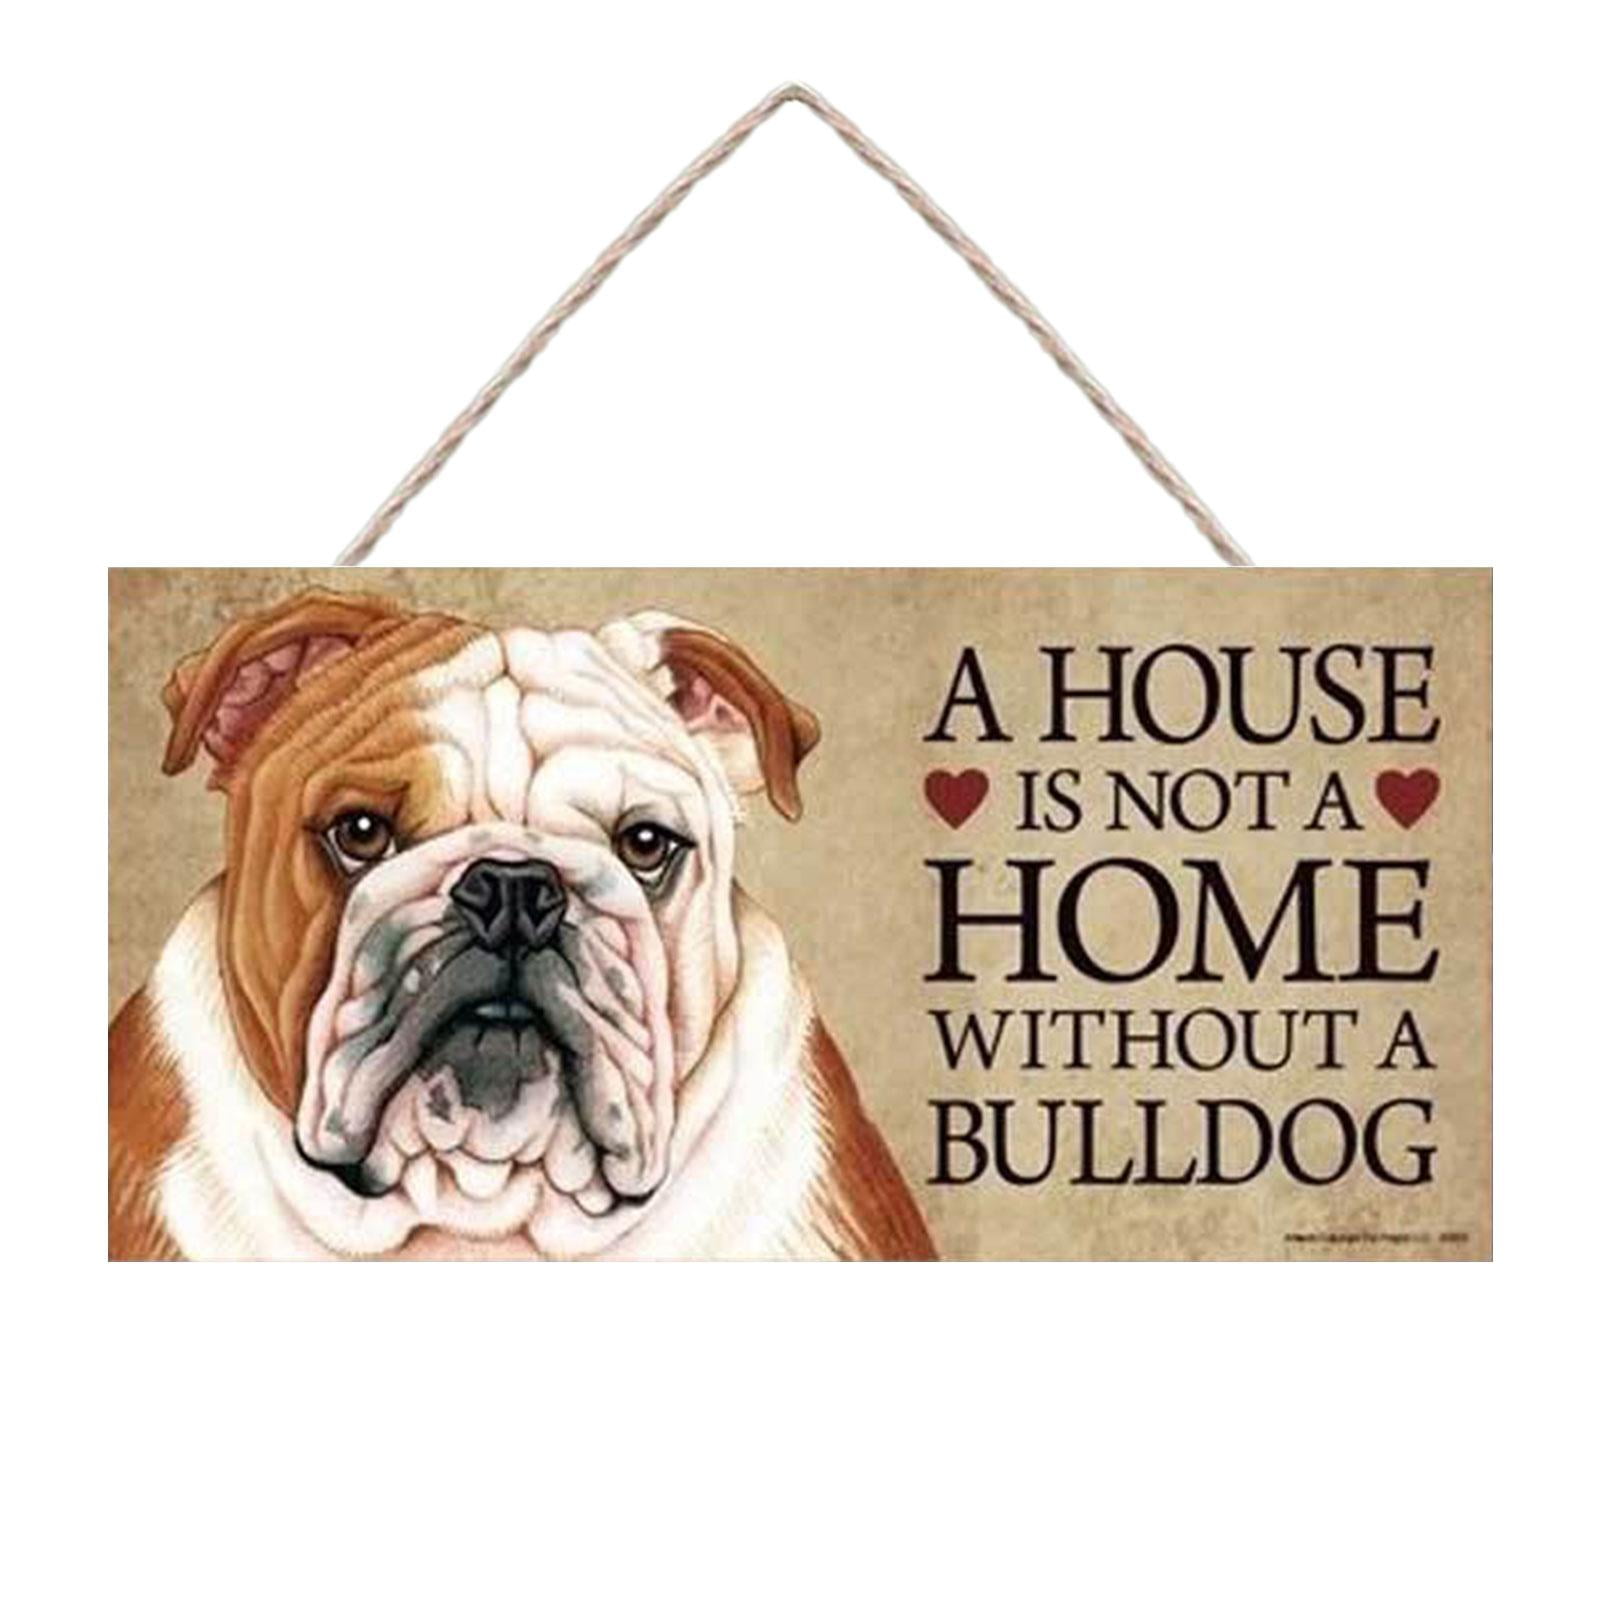 Bulldog "Welcome" Rustic Wall Sign Plaque Gifts Home Pets Dogs 